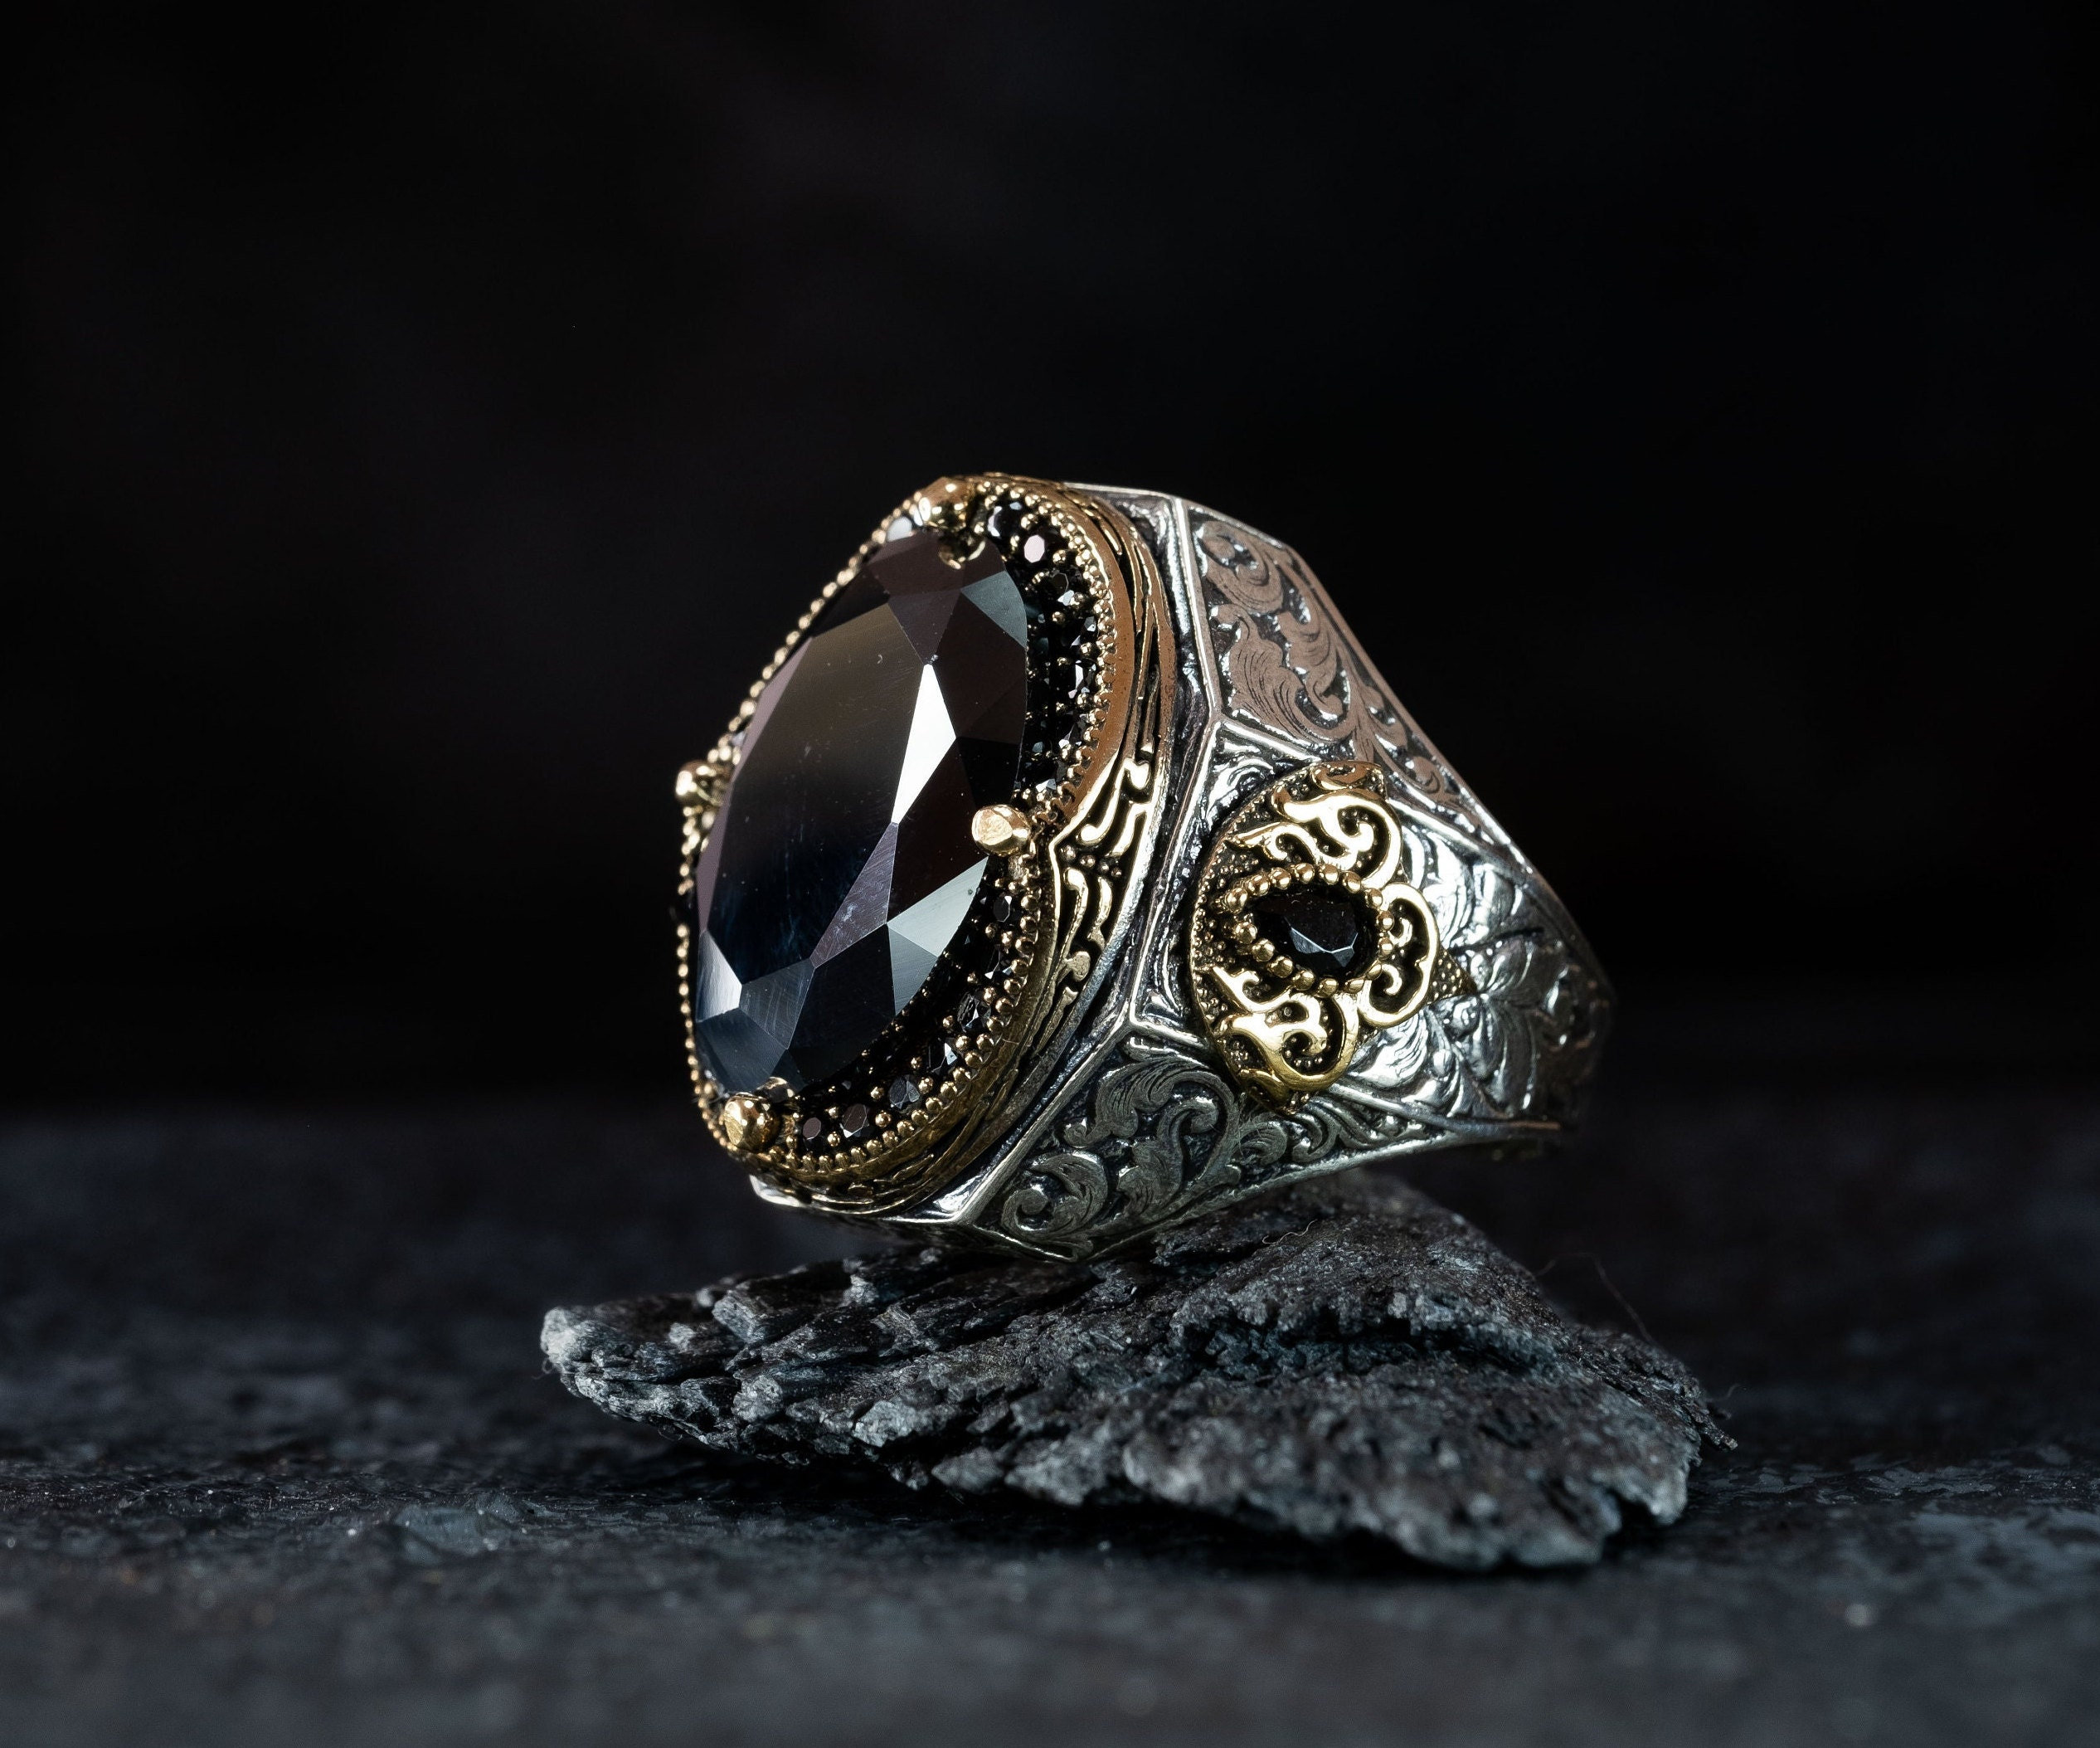 Buy Silver-Toned & Black Rings for Men by Oomph Online | Ajio.com